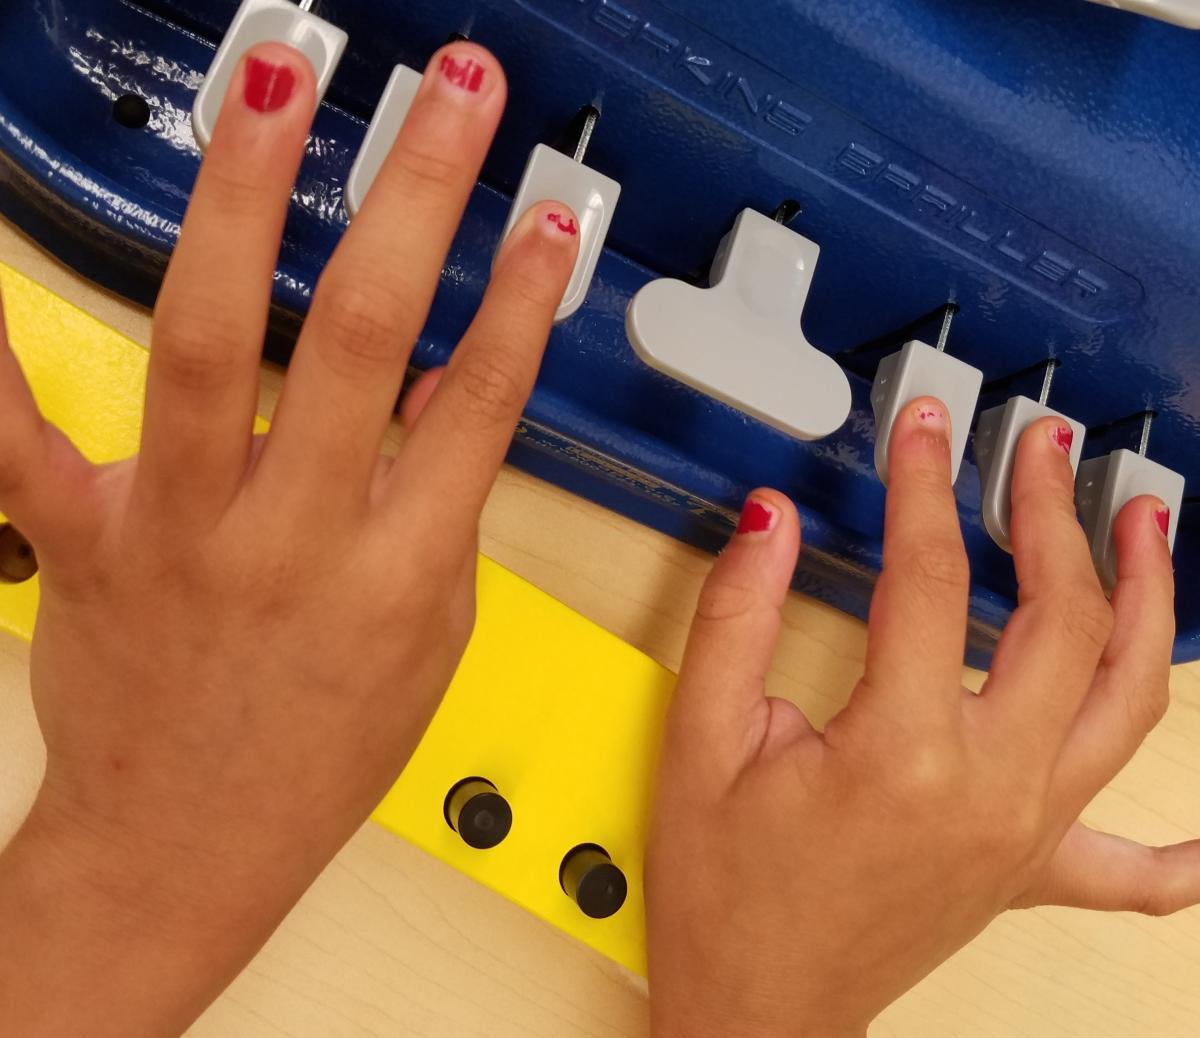 Finger positions on a braillewriter